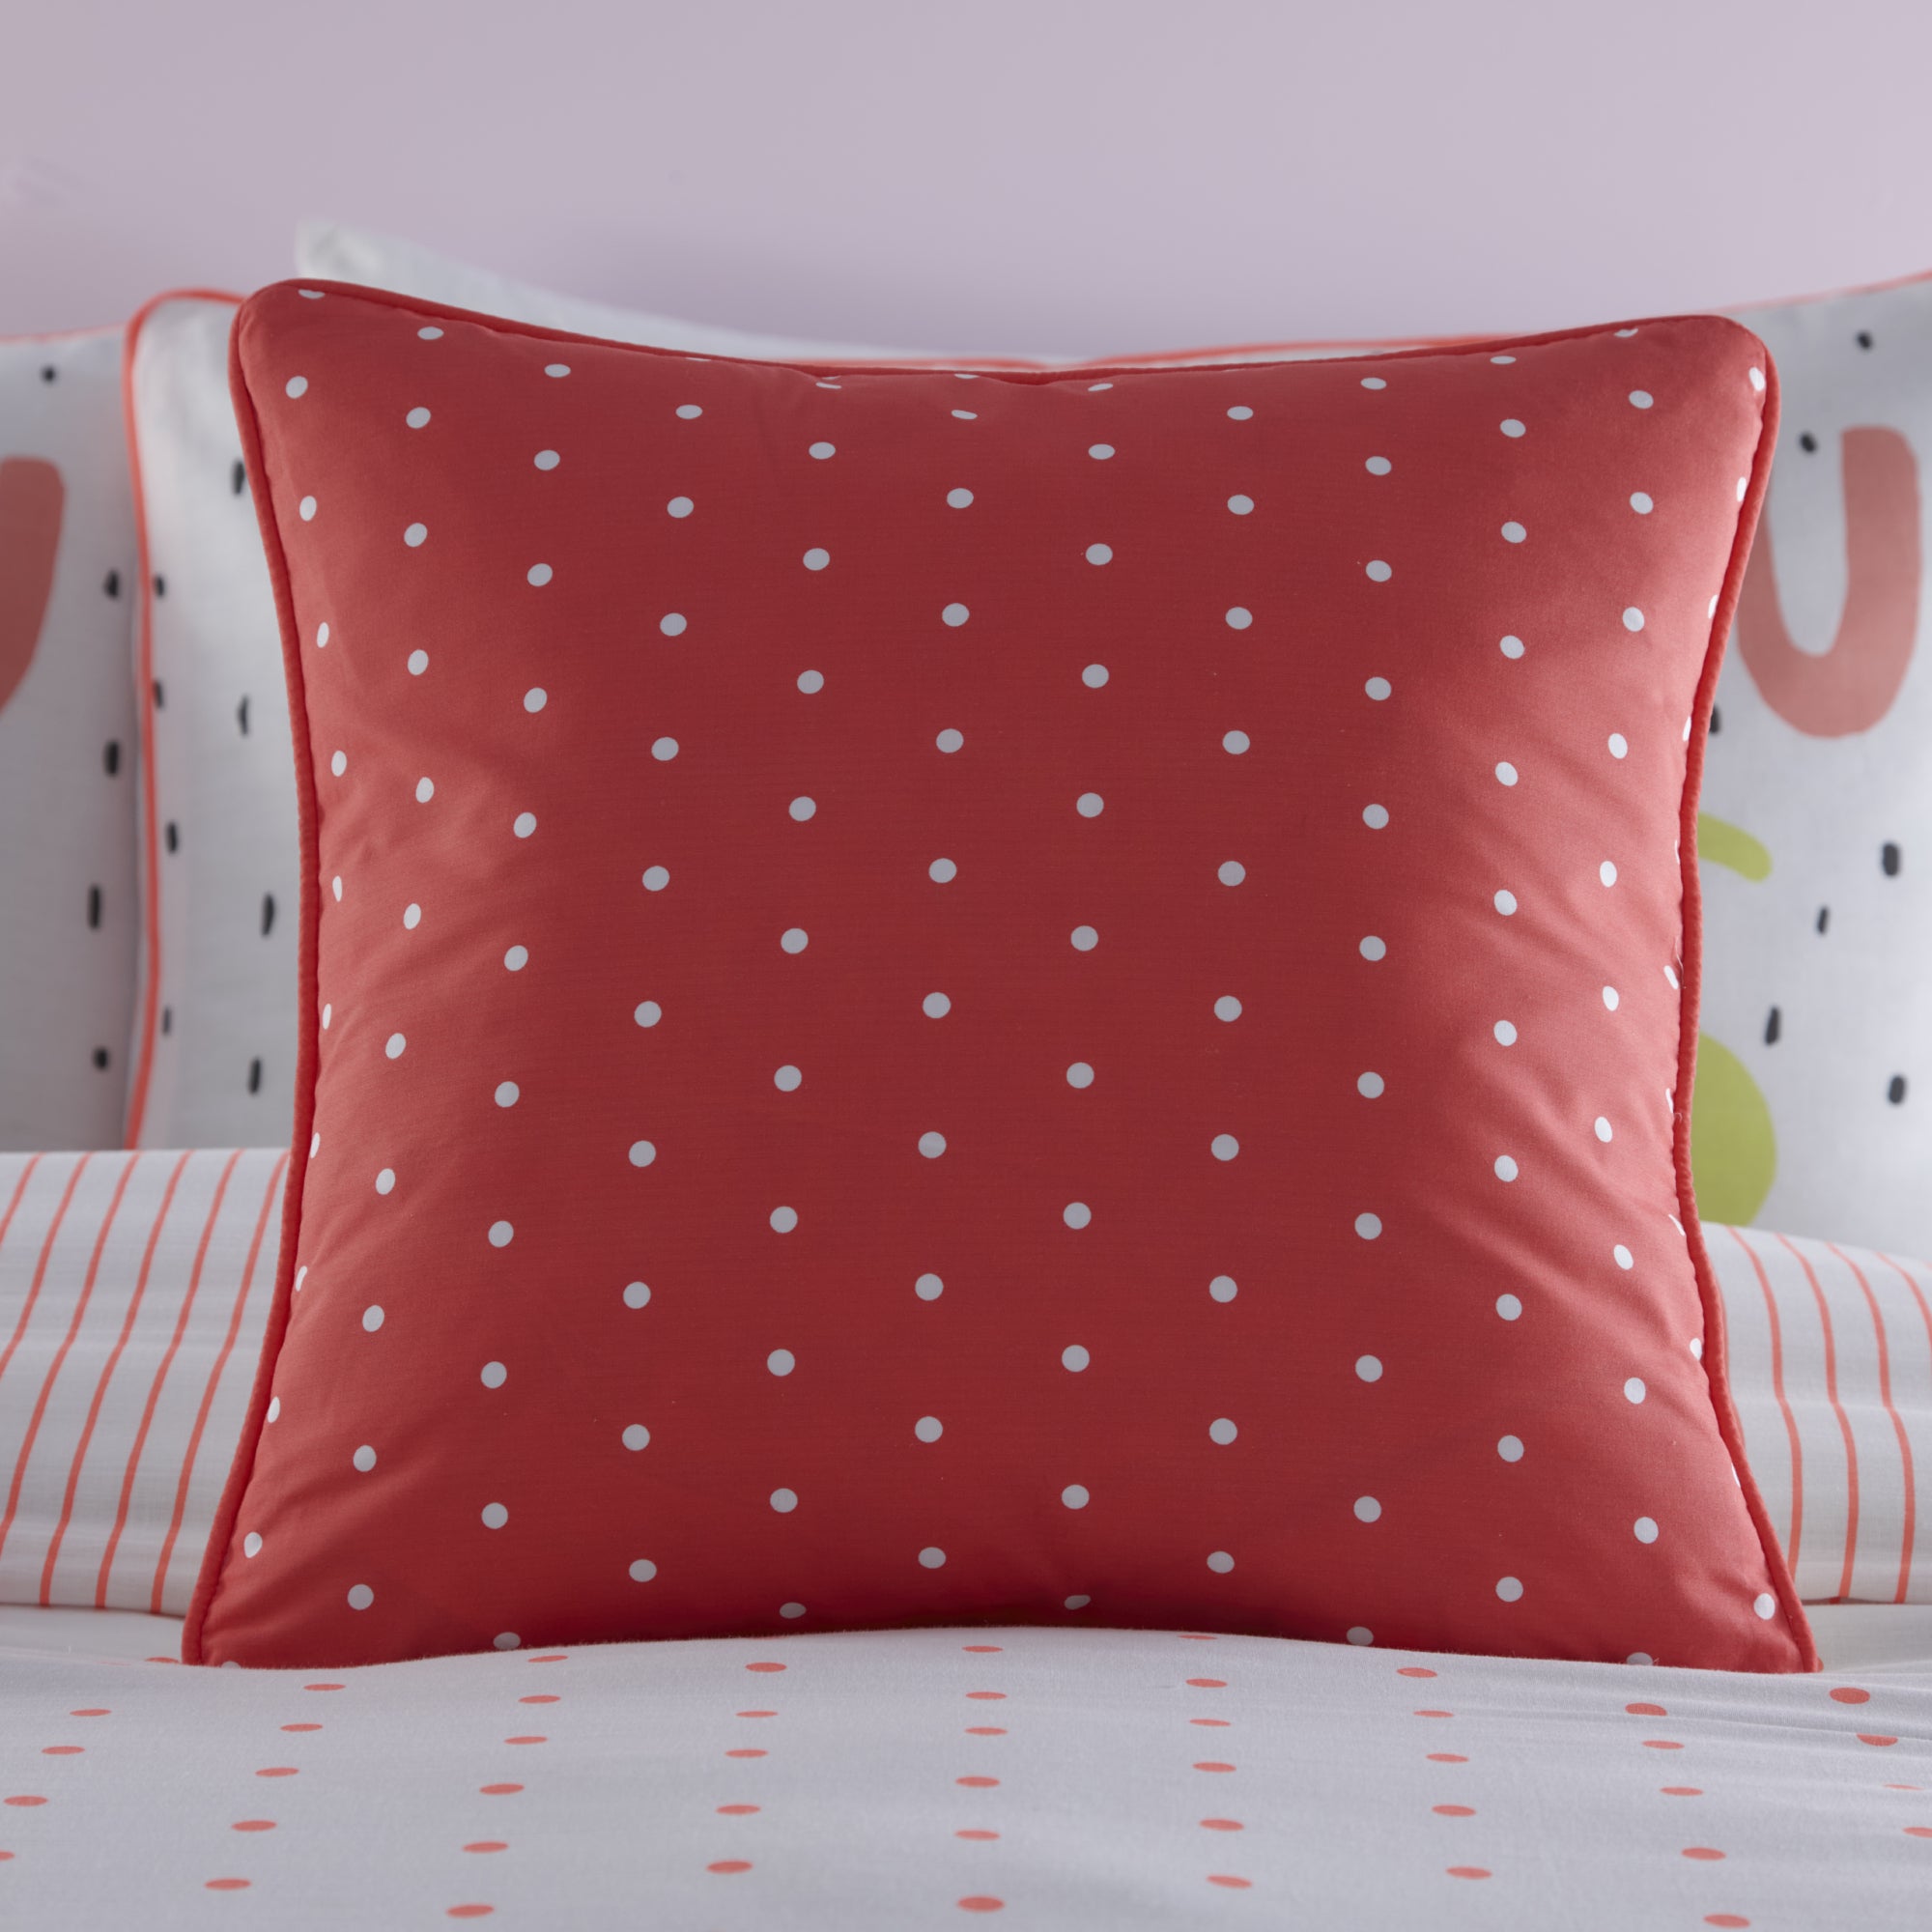 Filled Cushion Love by Appletree Kids in Coral